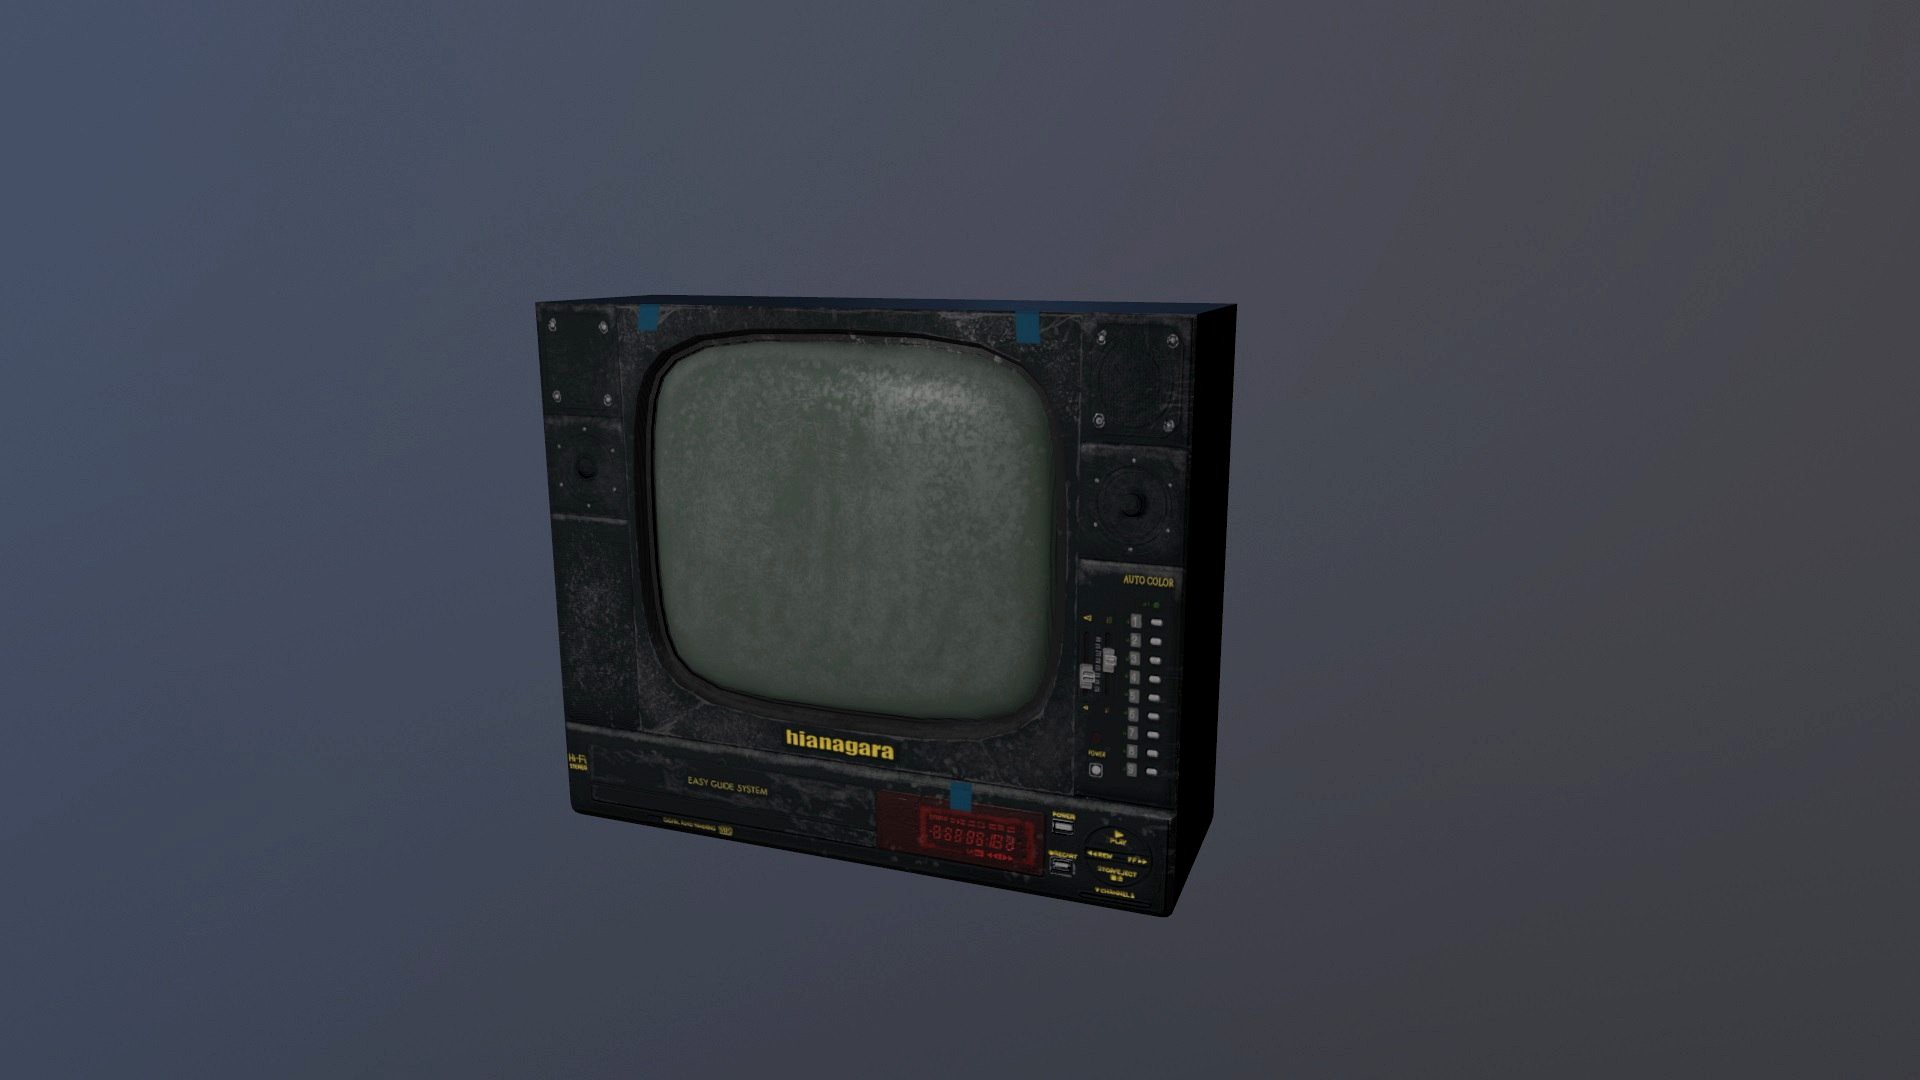 Old TV props